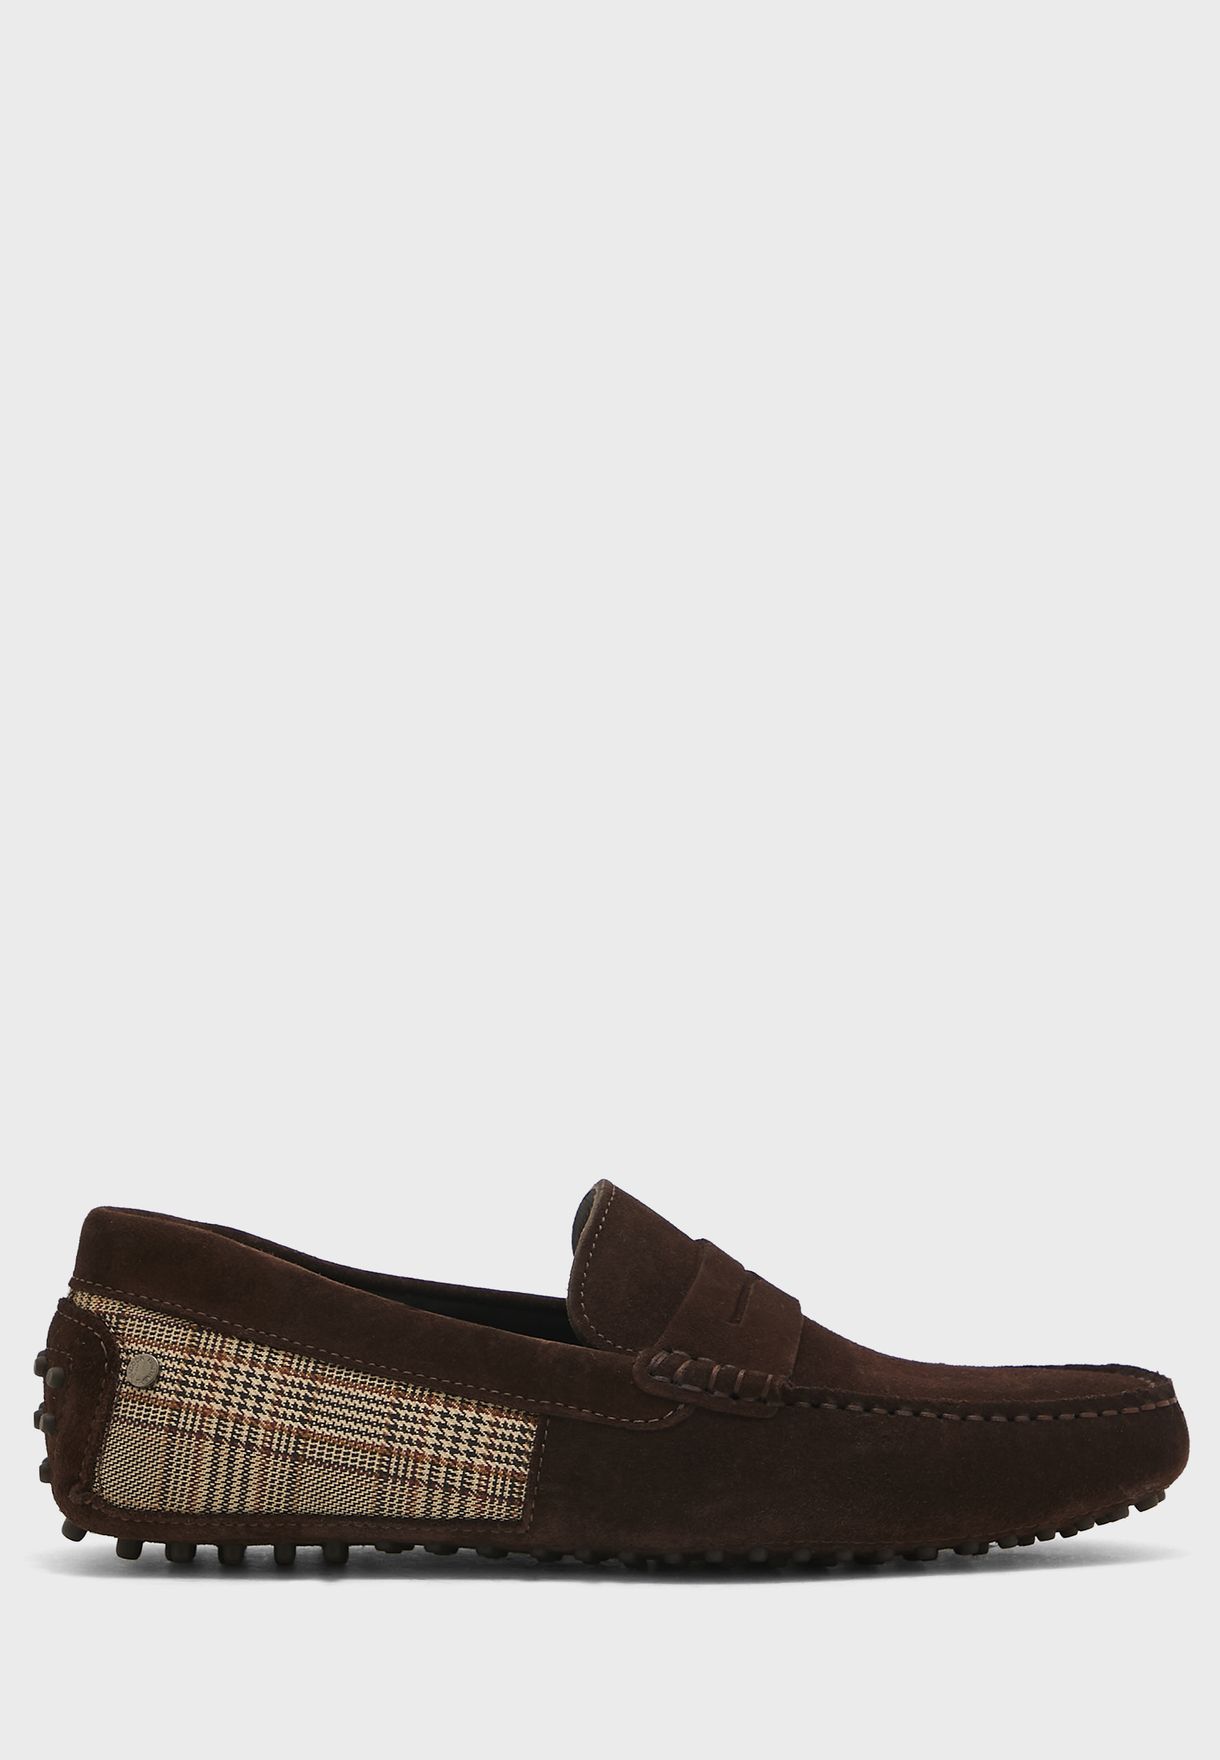 Checked Pattern Penny Loafers